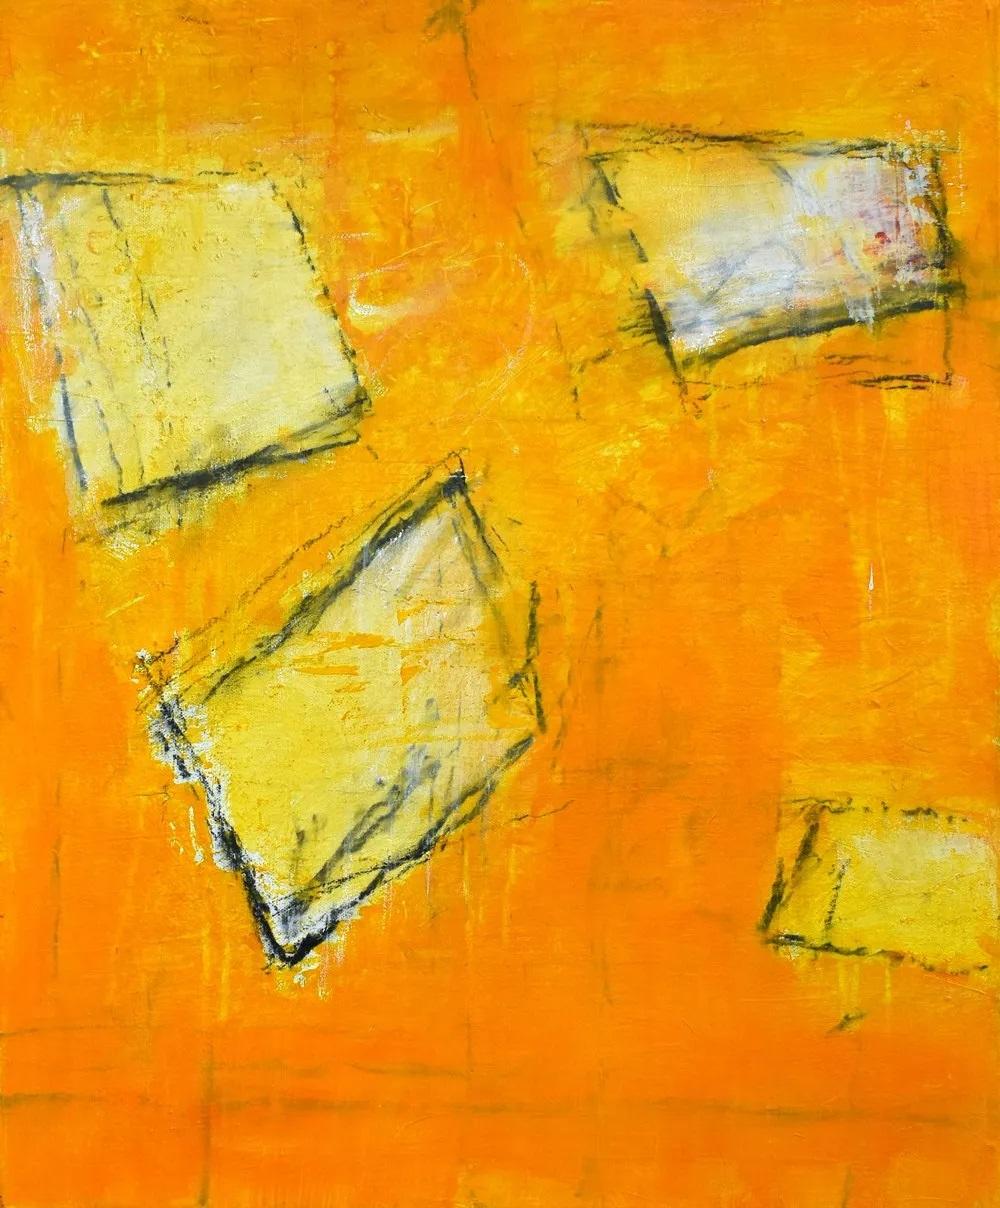 "The Poem" Contemporary Orange and Yellow Toned Abstract Expressionist Painting - Mixed Media Art by Tony Magar